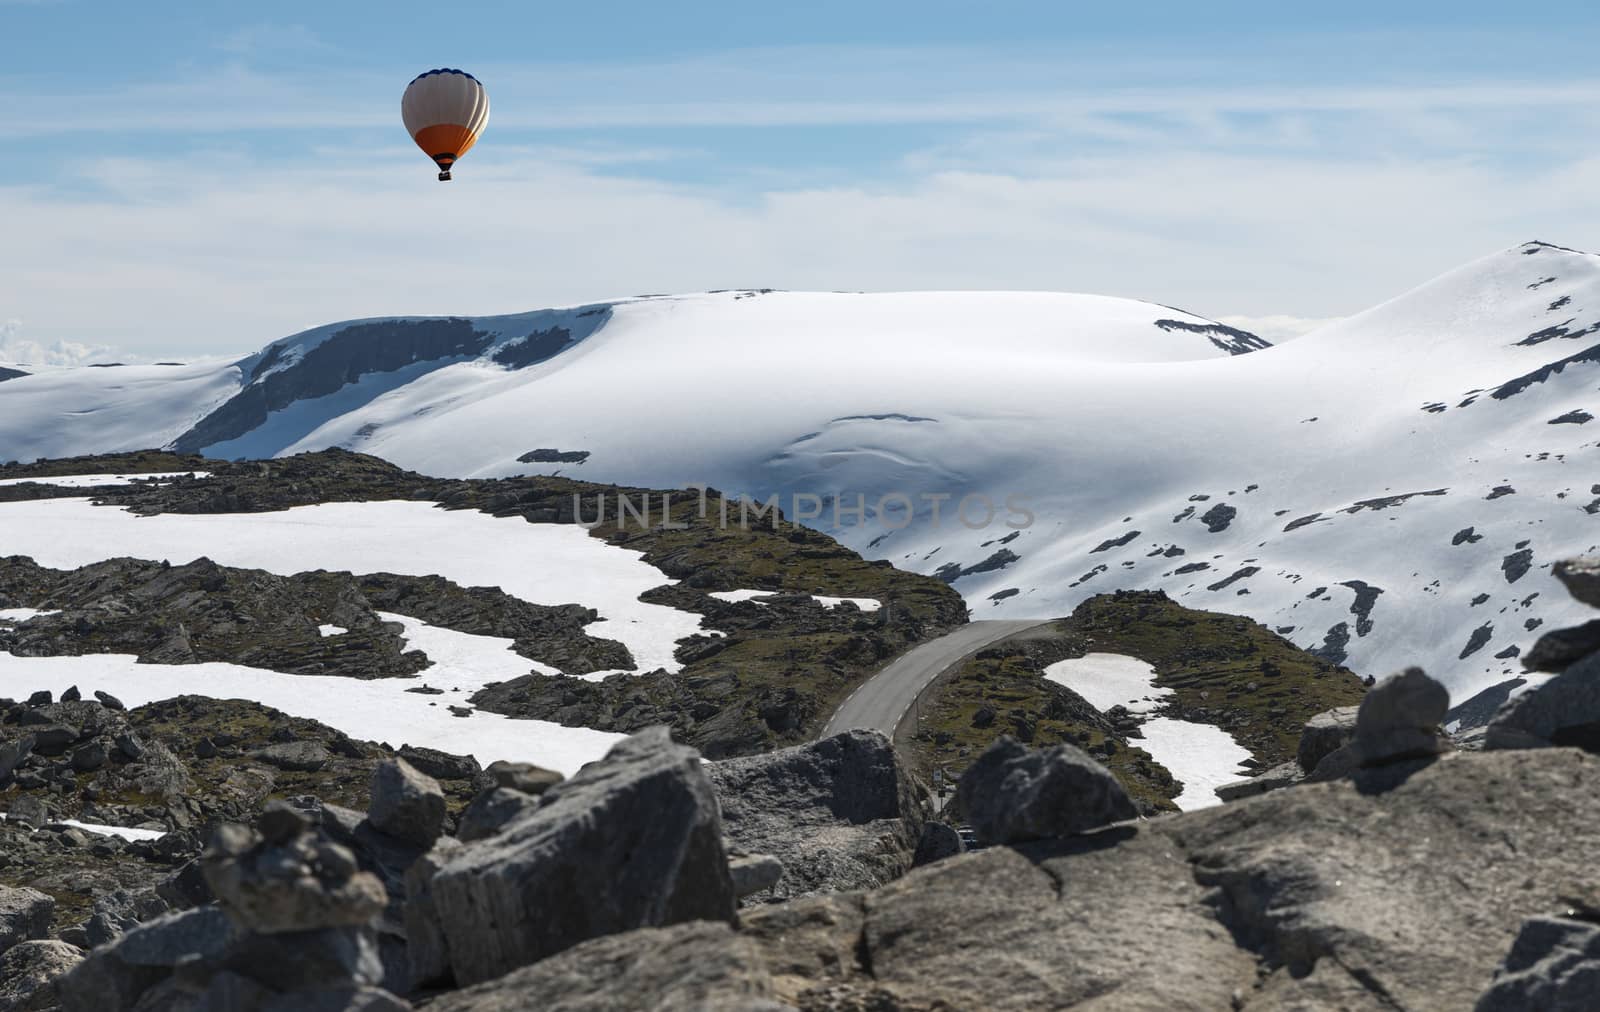 hot air balloon above the dalsnibba or road 63 touristic road to the high view of the geirangerfjord in norway with snow in summer on the tops of the mountains